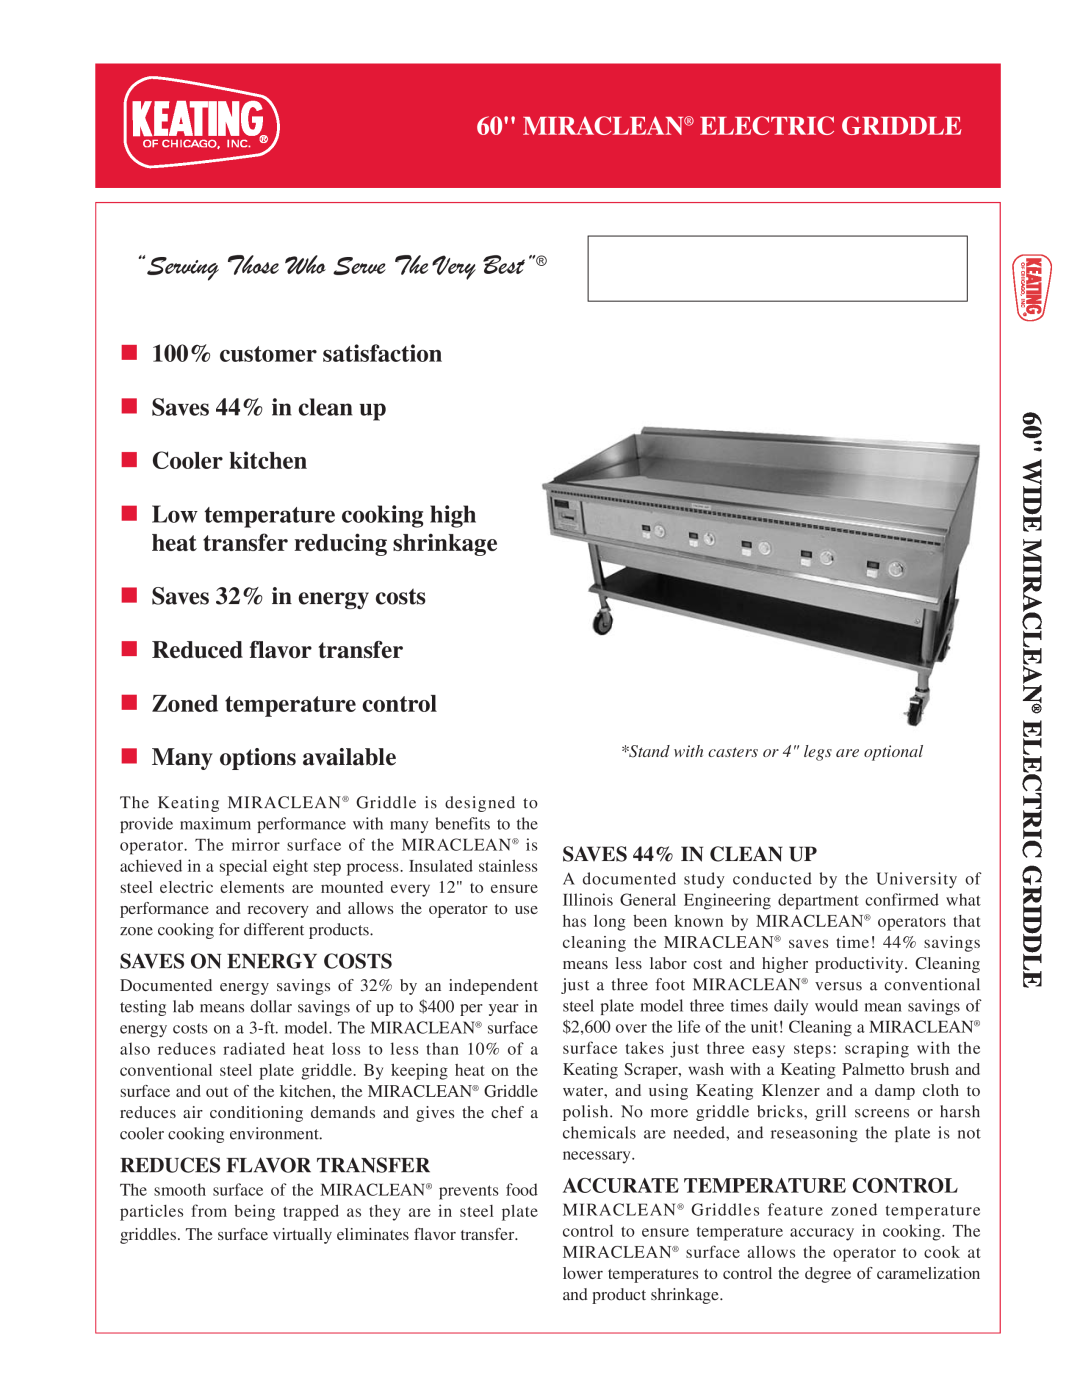 Keating Of Chicago 60 manual Wide Miraclean Electric Griddle, “Serving Those Who Serve The Very Best”, Cooler kitchen 